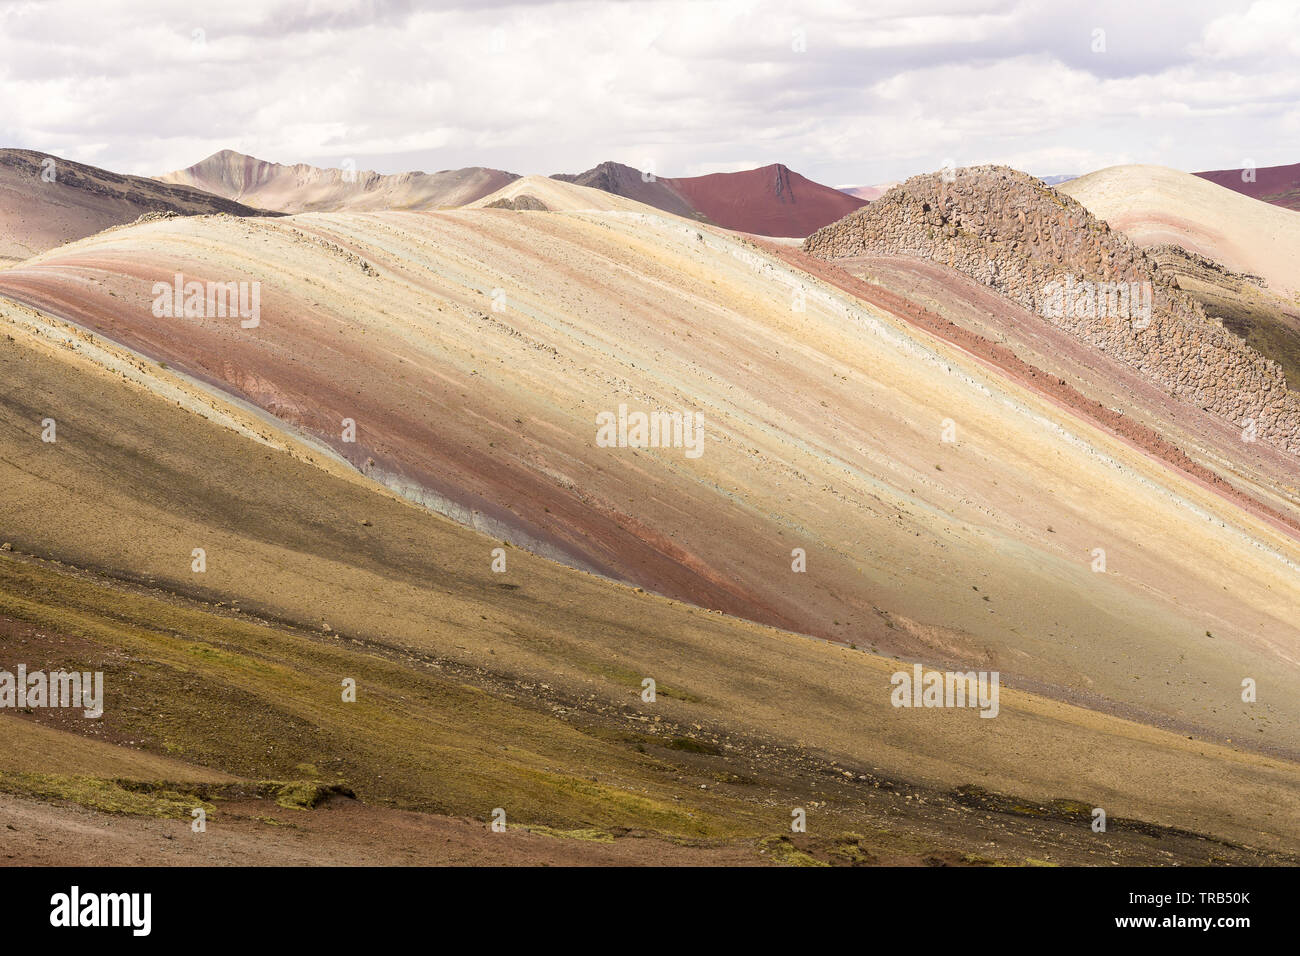 Peru Palccoyo Mountain (alternative Rainbow Mountain) - view of the slopes of the colorful Palccoyo Mountain in Peru, South America. Stock Photo